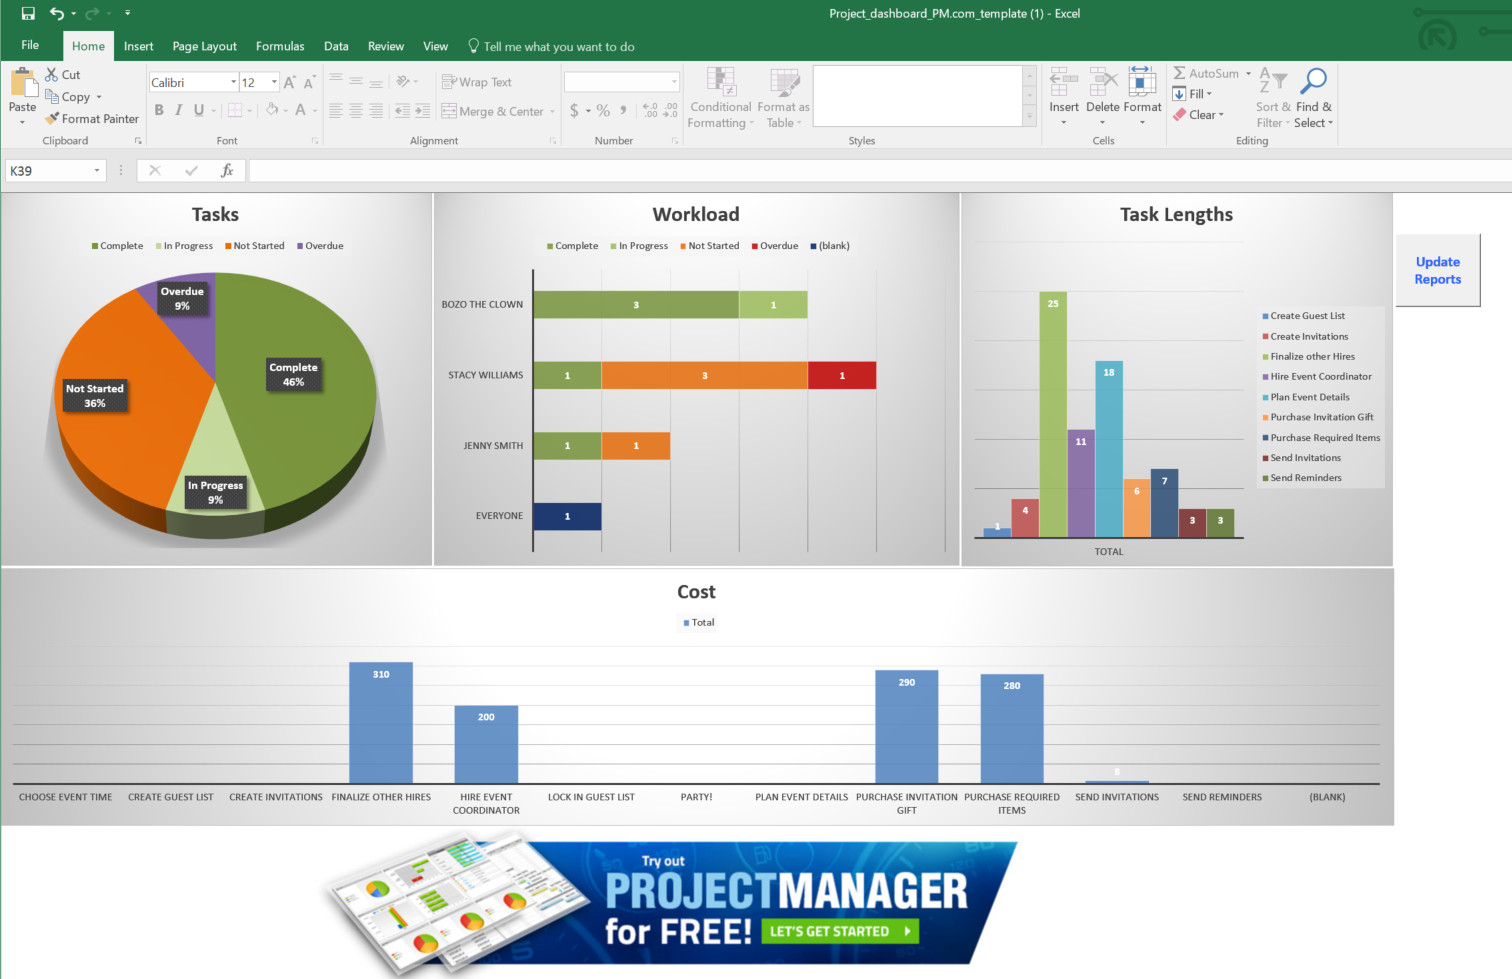 Guide To Excel Project Management - Projectmanager throughout Project Tracking Excel Spreadsheet